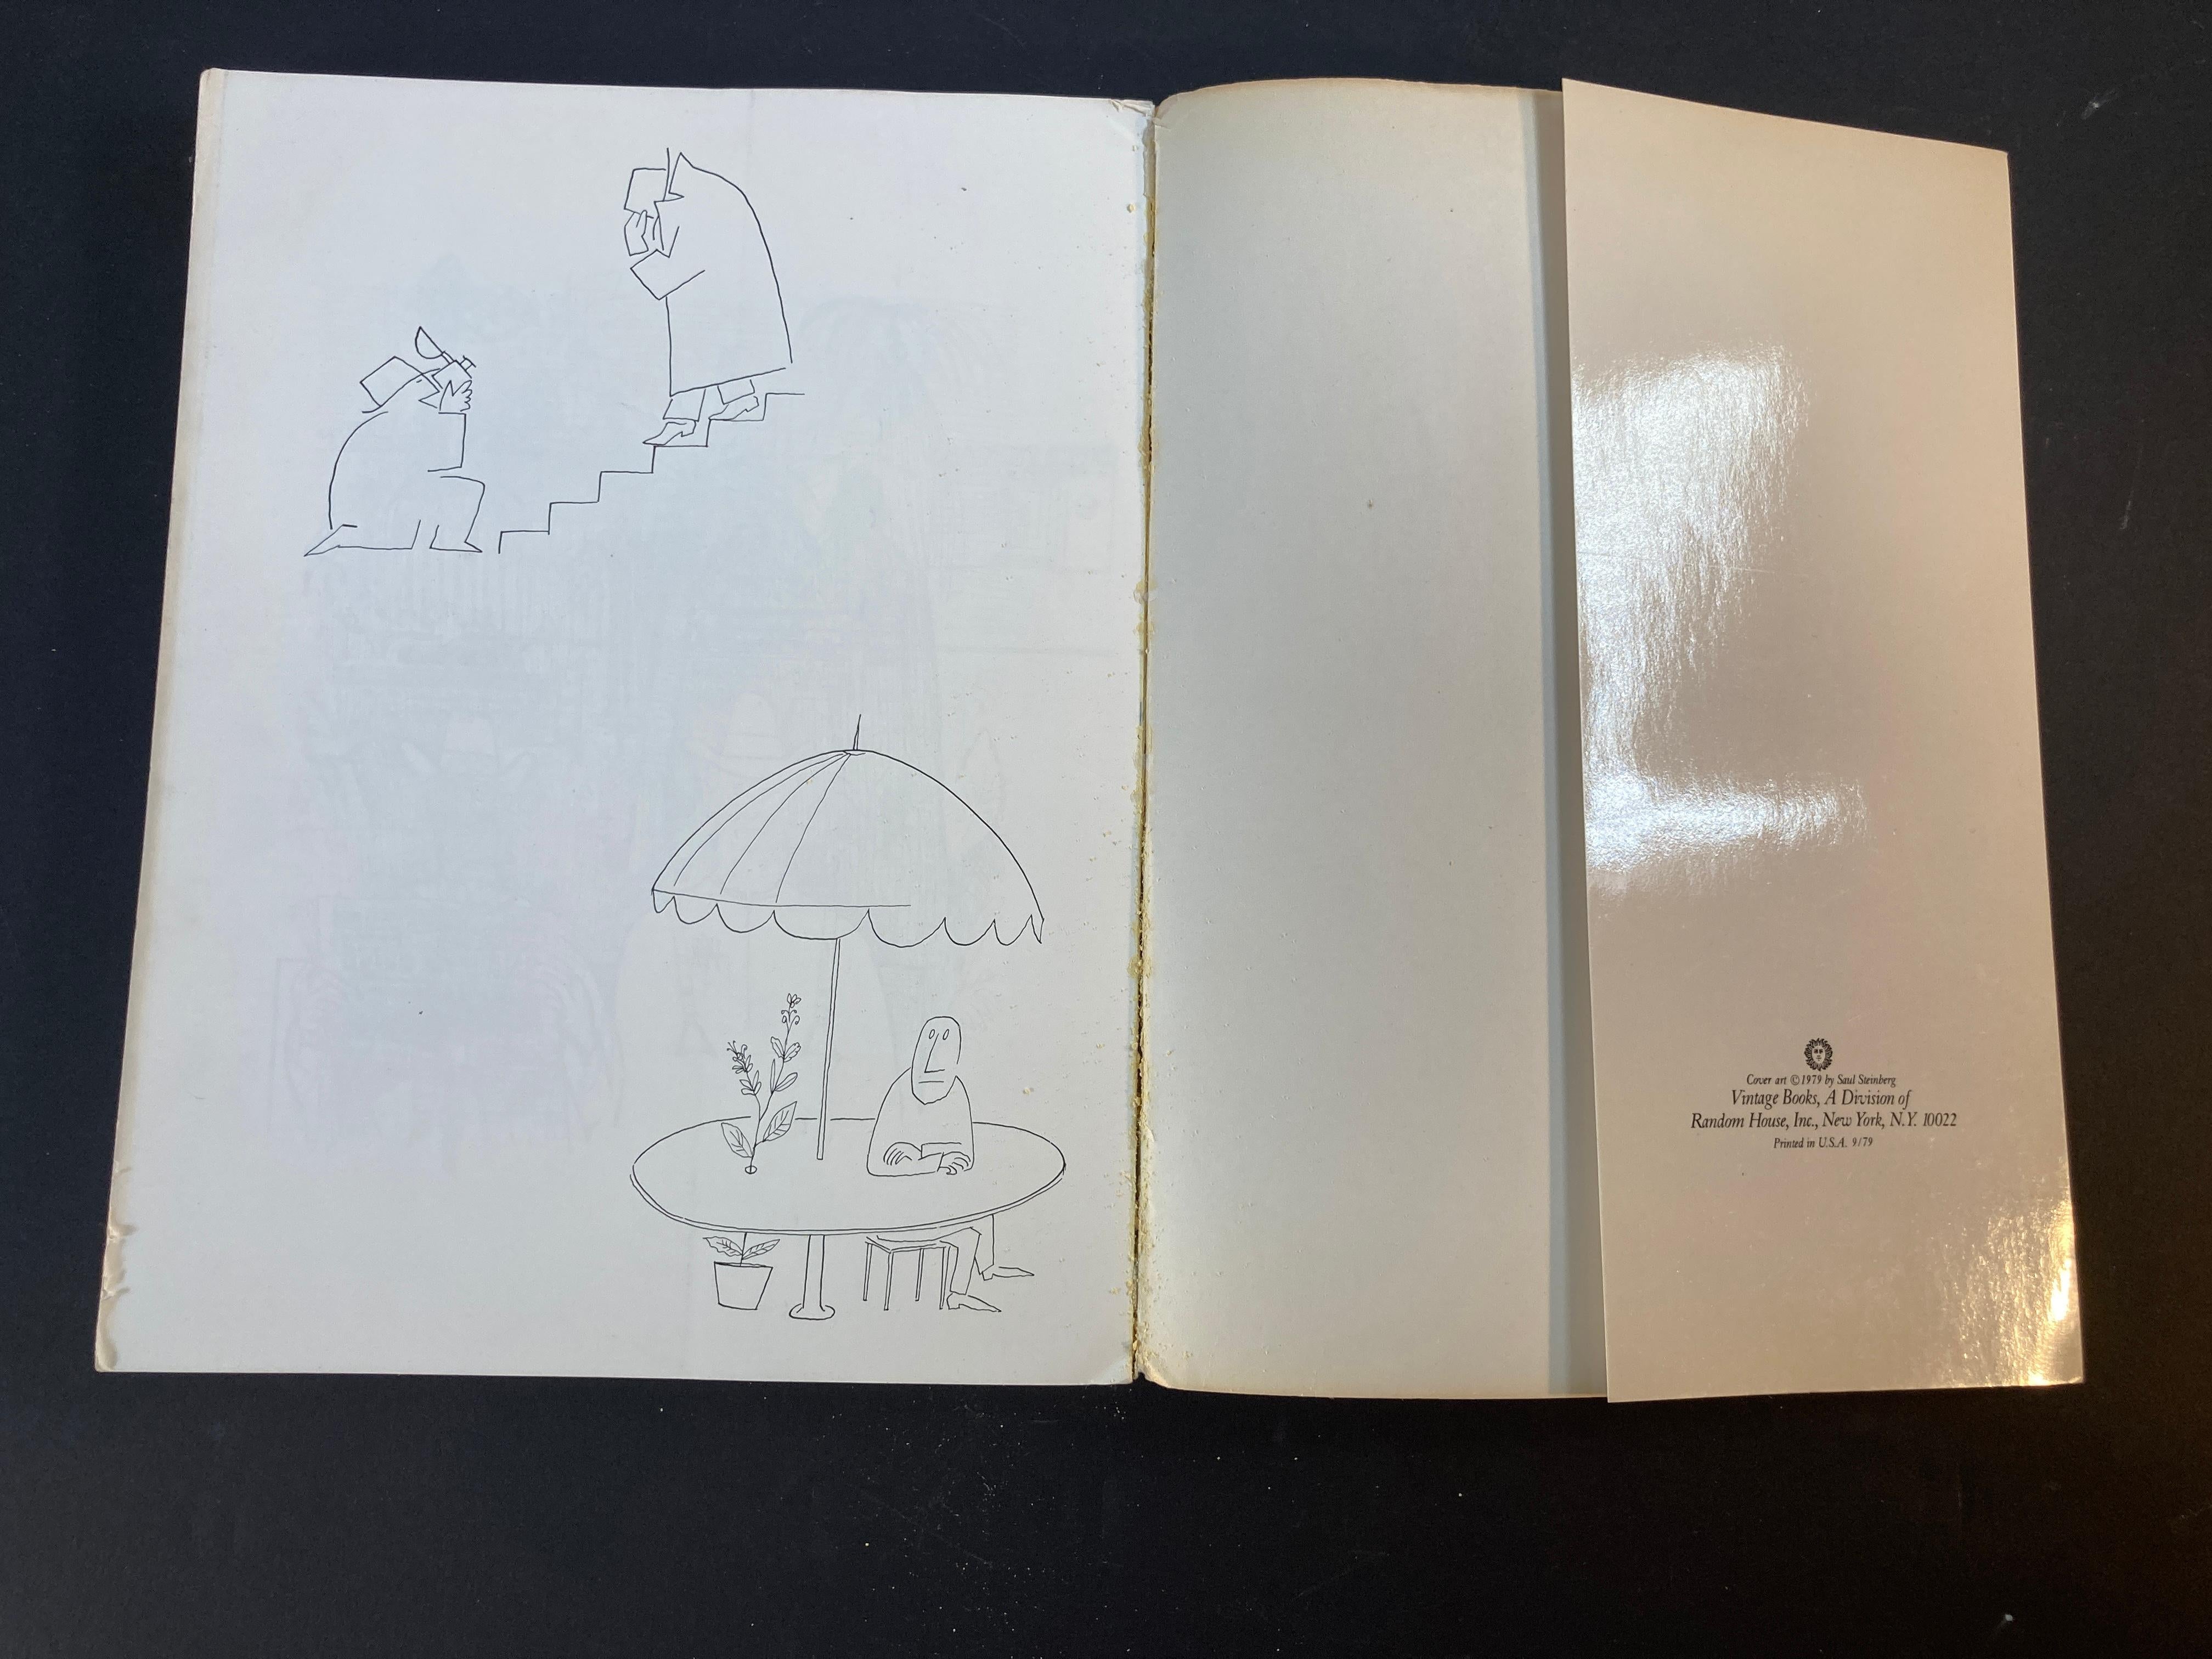 Passport Saul Steinberg Published by Harper & Brothers, New York., 1979 For Sale 4